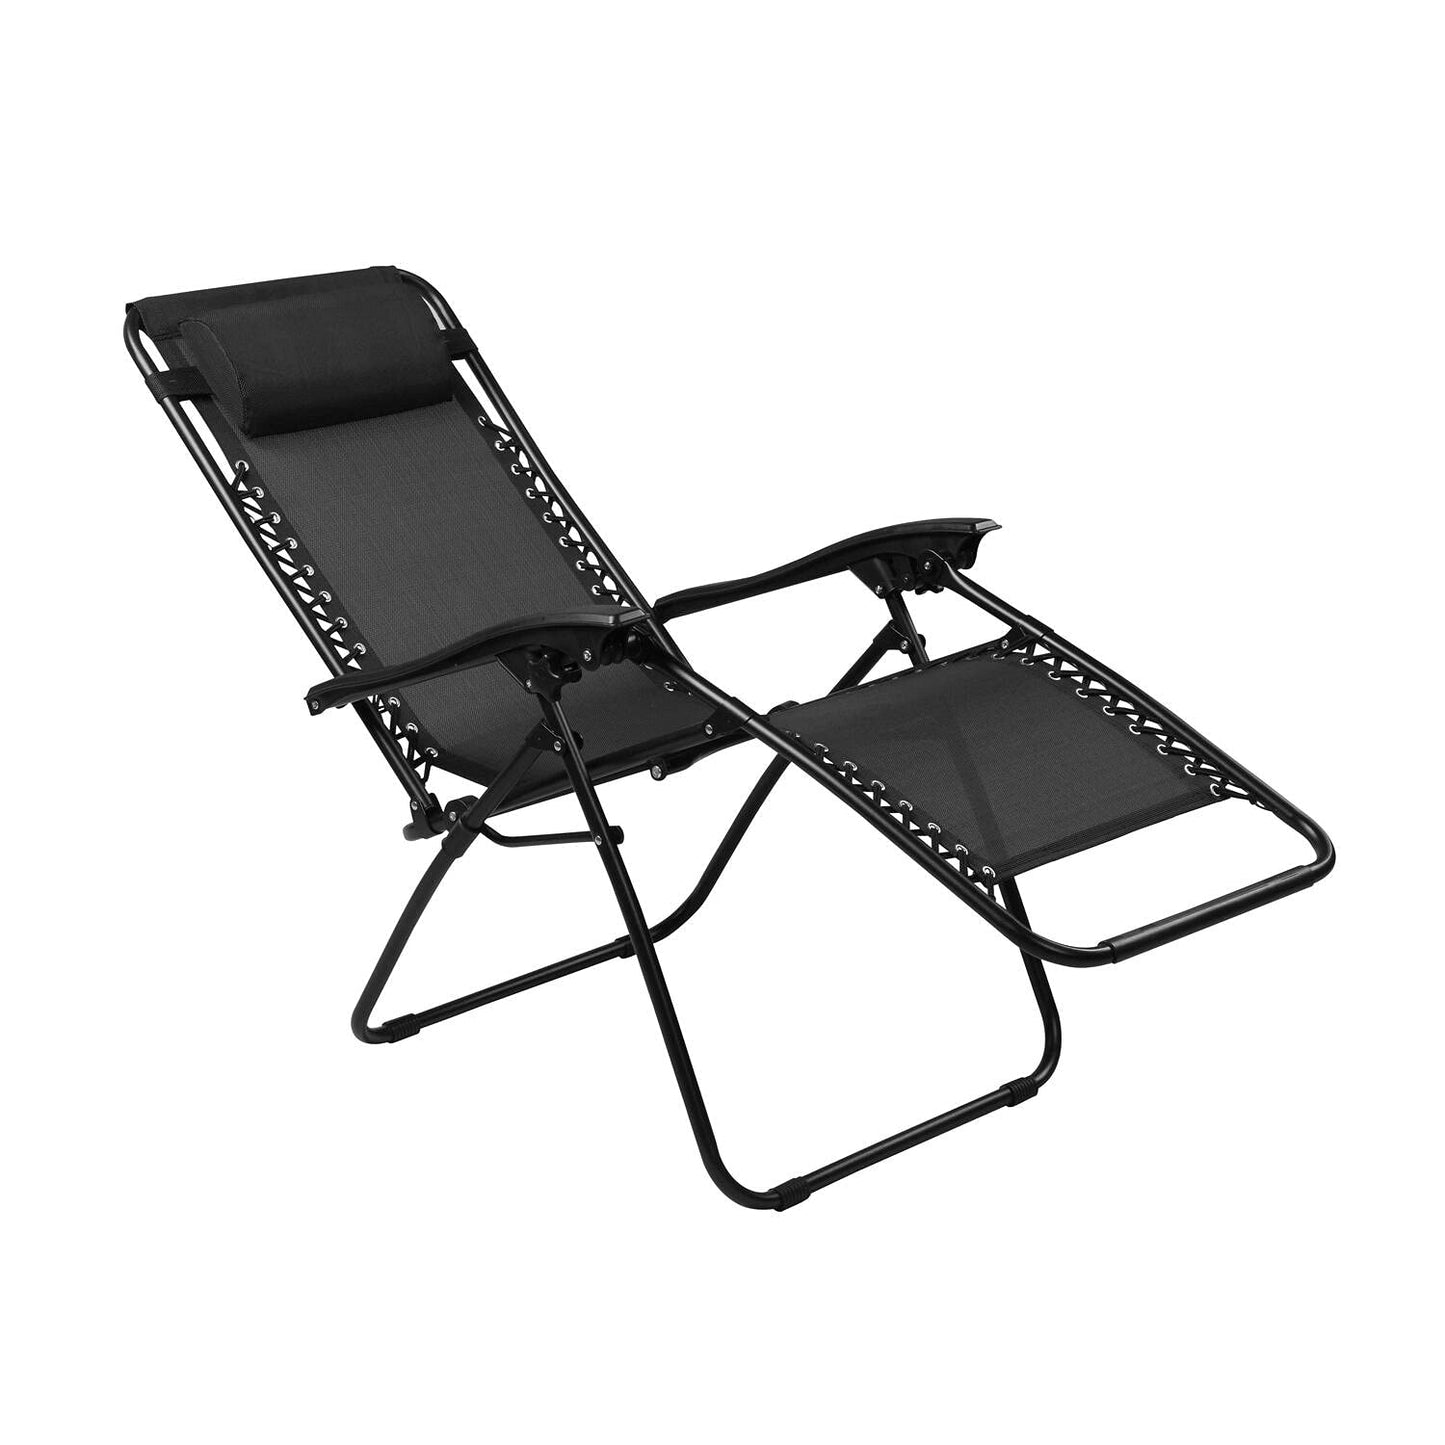 Zero Gravity Chairs Set of 2 Pool Lounge Chair Zero Gravity Recliner Zero Gravity Lounge Chair Antigravity Chairs Anti Gravity Chair Folding Reclining Camping Chair with Headrest by Naomi Home - Black Modern